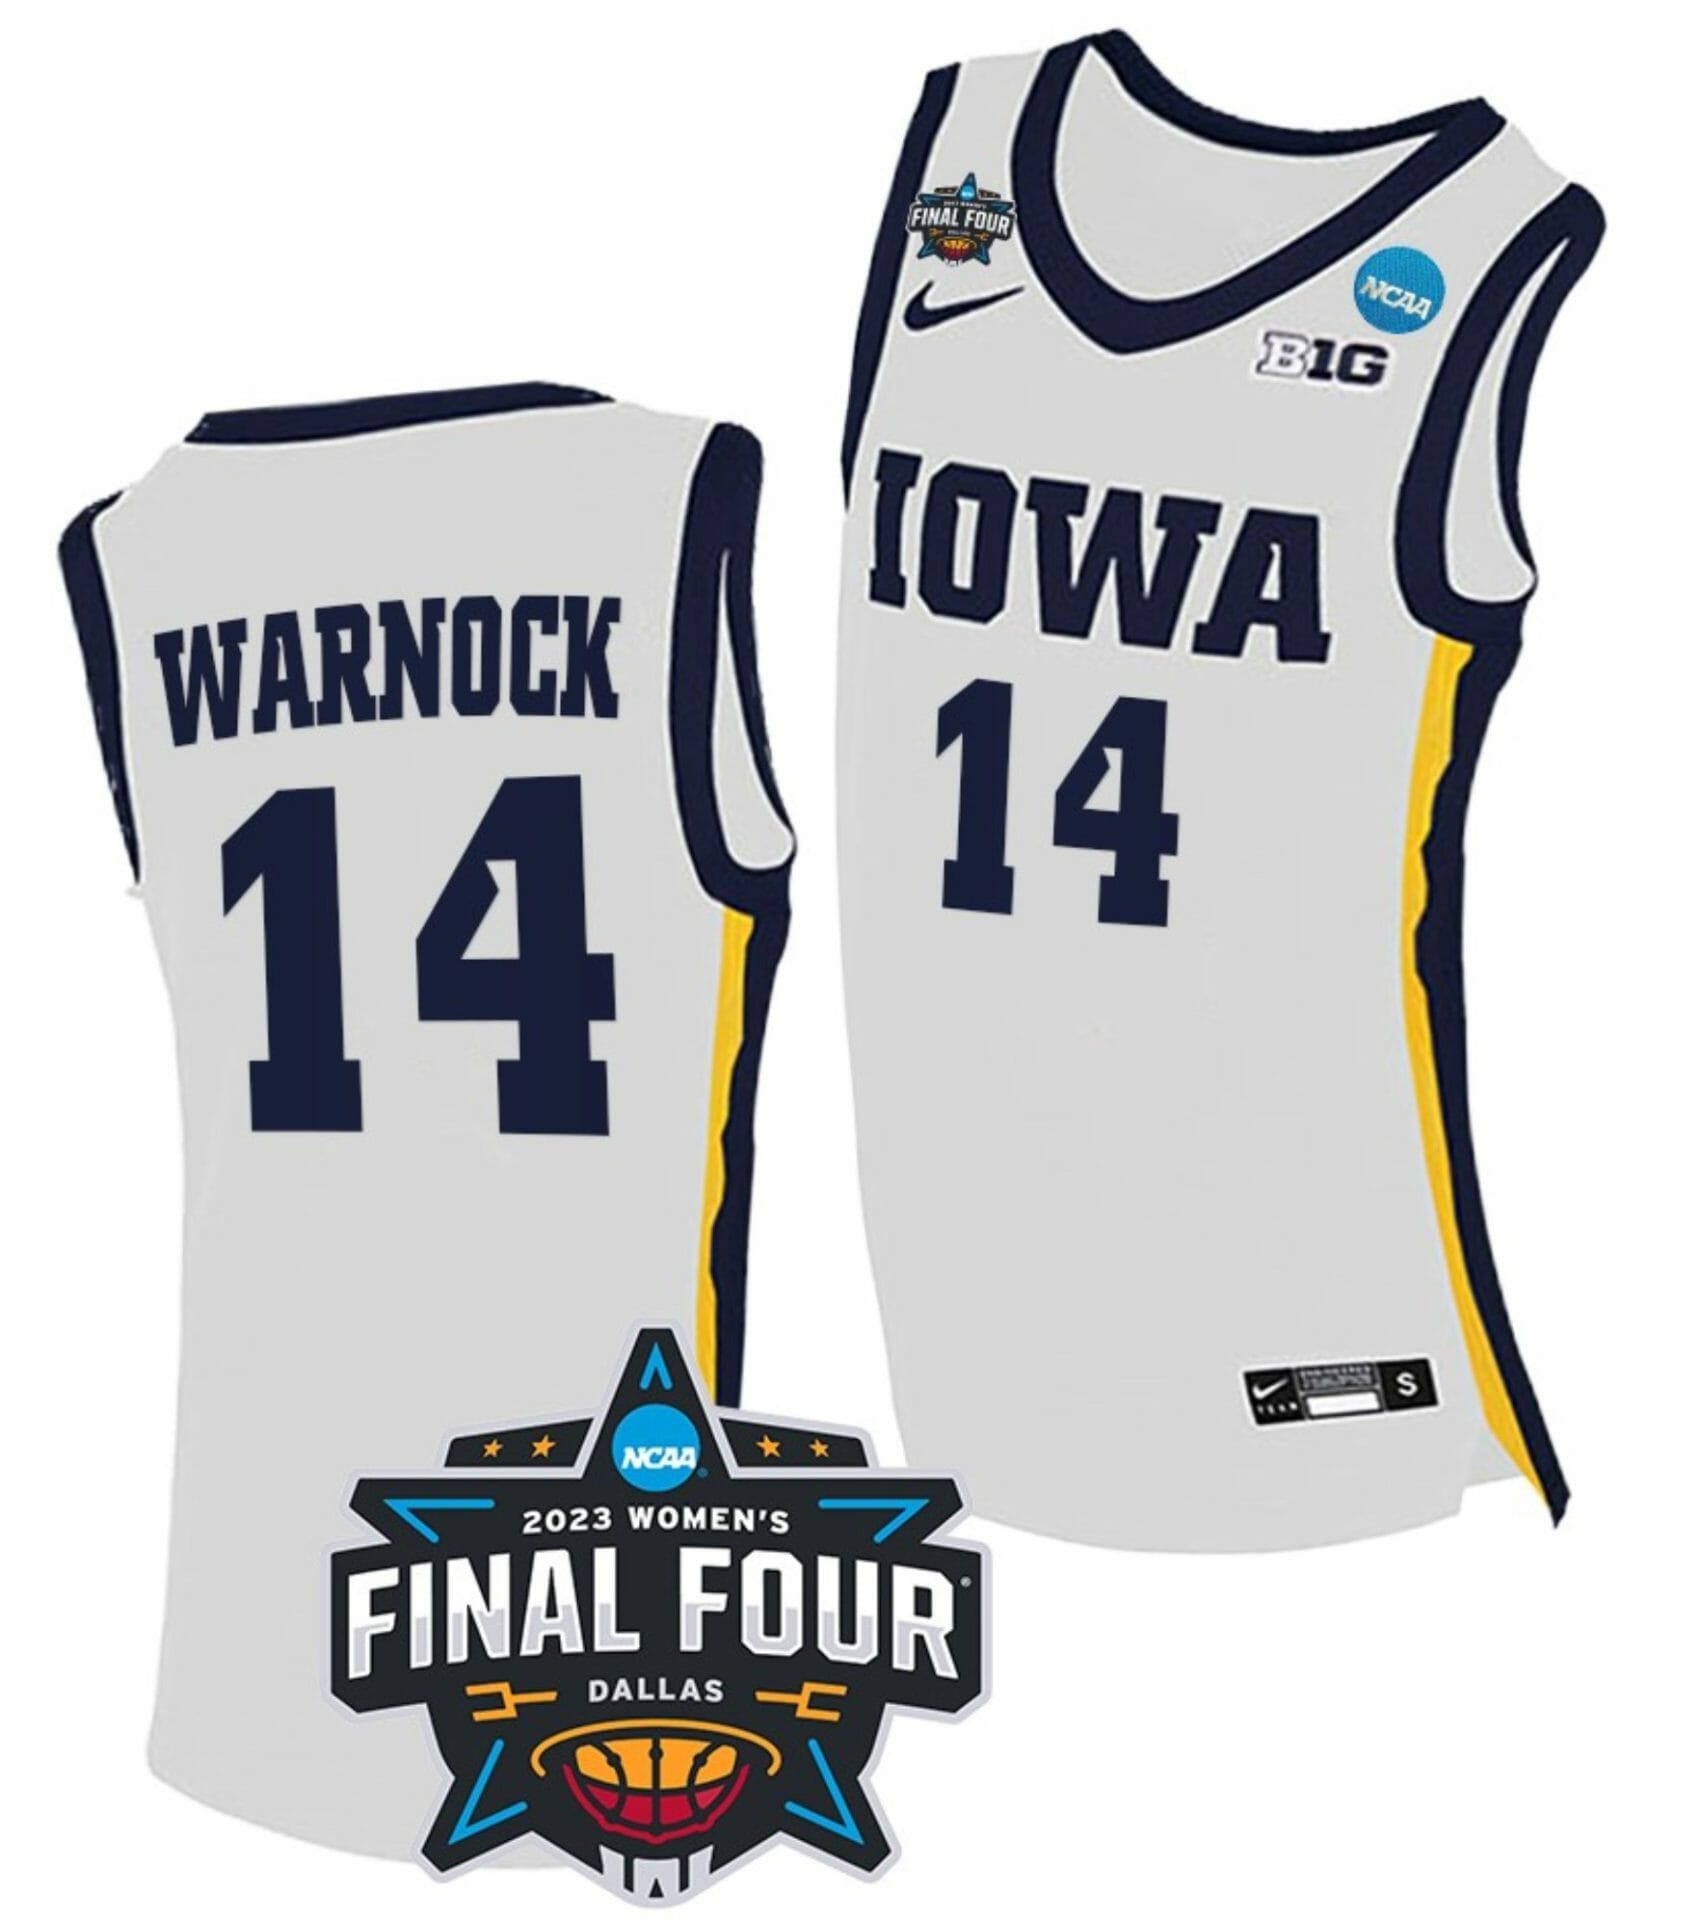 Available] Buy New McKenna Warnock Jersey Final Four White